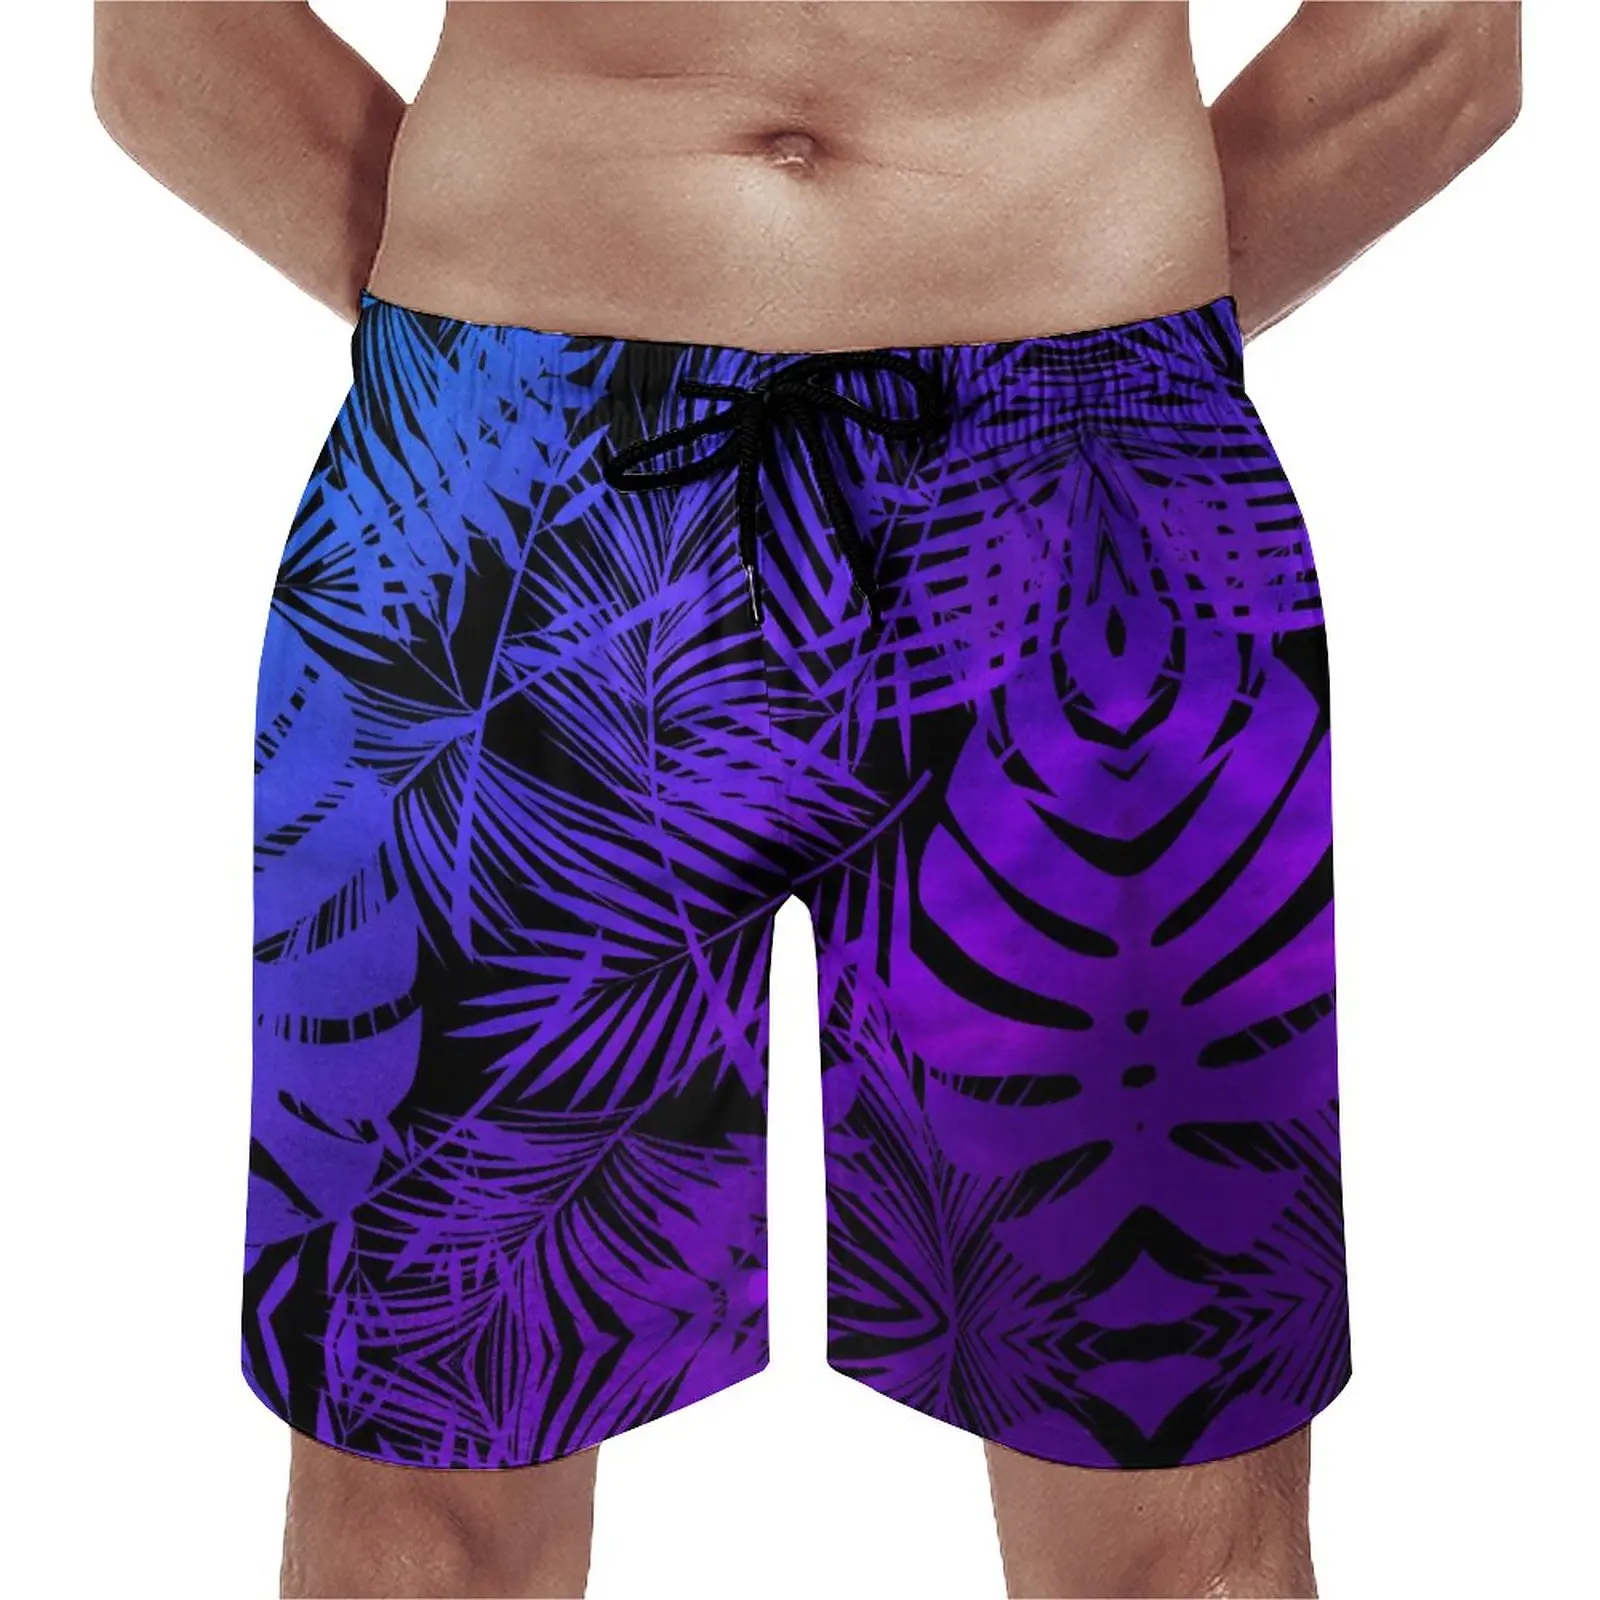 

Gym Shorts Tropical Palm Leaf Retro Swim Trunks Purple Ombre Print Male Quick Drying Surfing Hot Large Size Board Short Pants